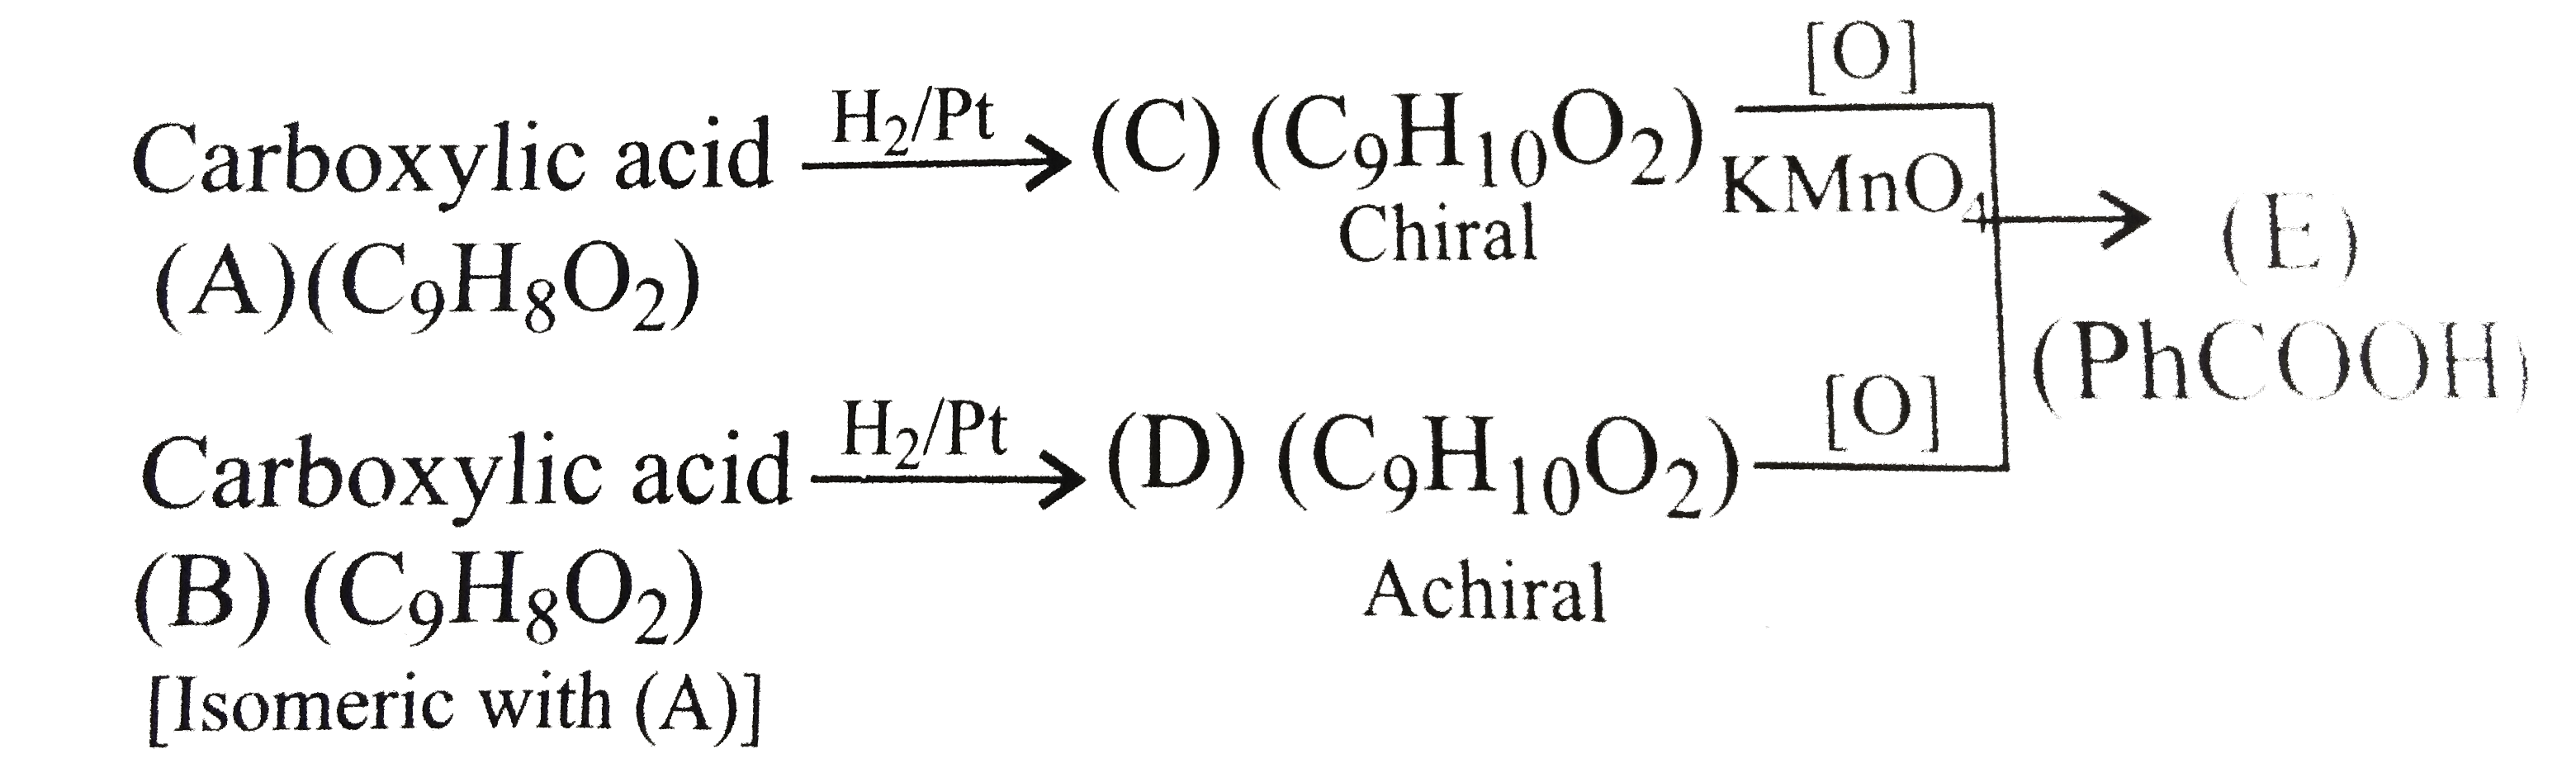 Carboxylic acid (A) is: